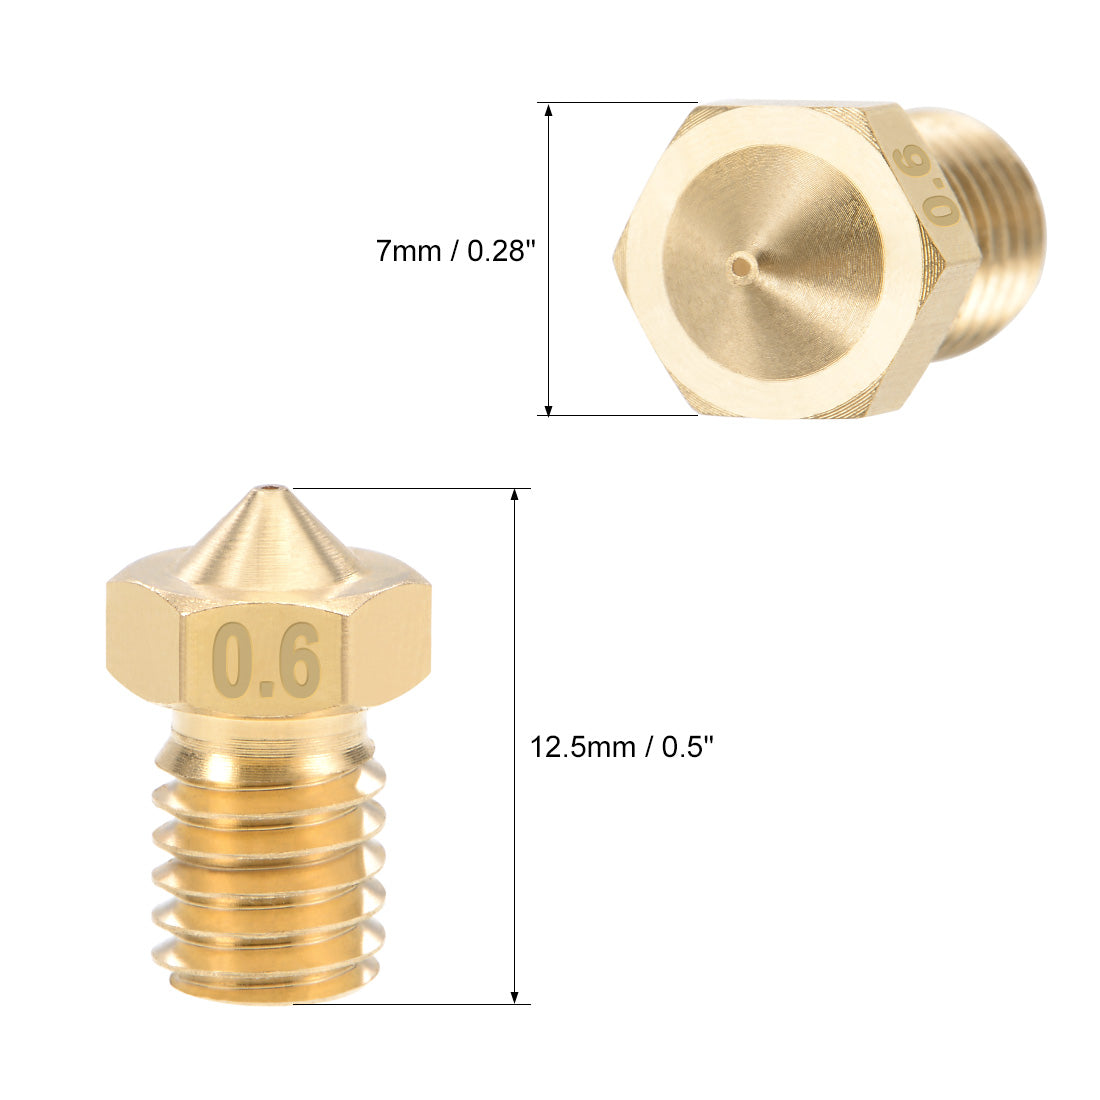 uxcell Uxcell 0.6mm 3D Printer Nozzle Head M6 for V5 V6 1.75mm Extruder Print, Brass 10pcs